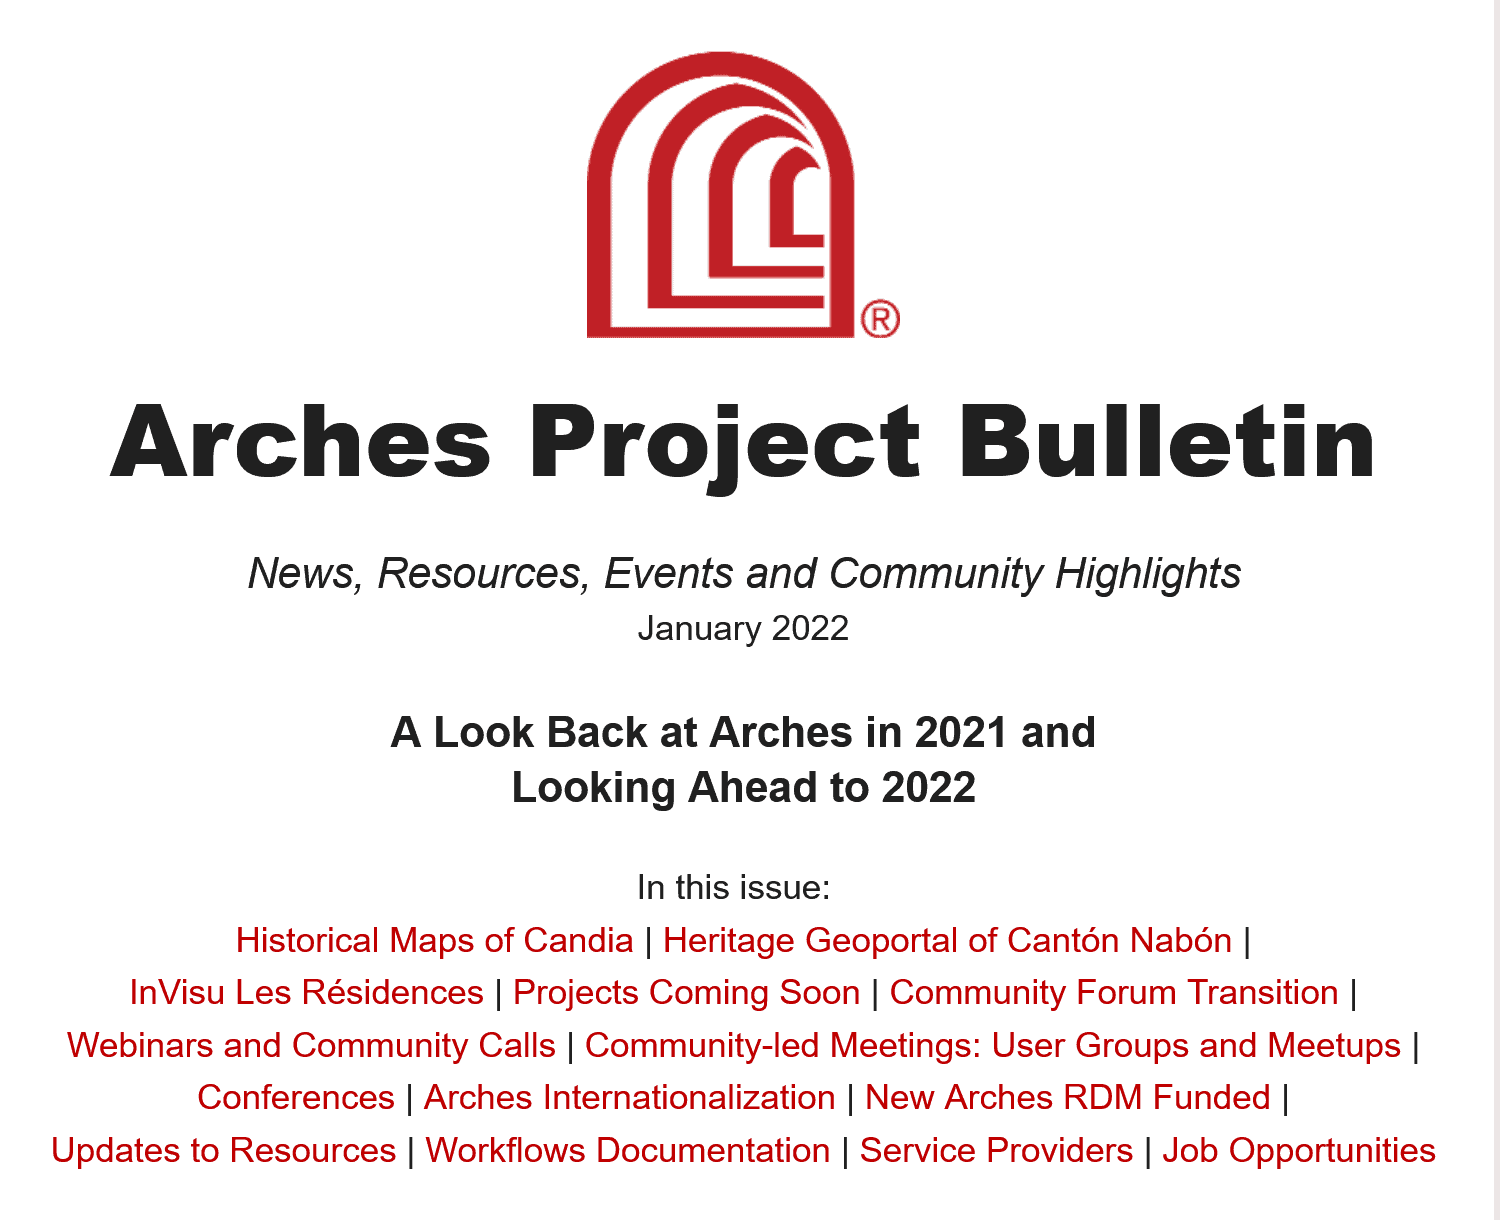 Screenshot of the latest Arches bulletin including title and table of contents